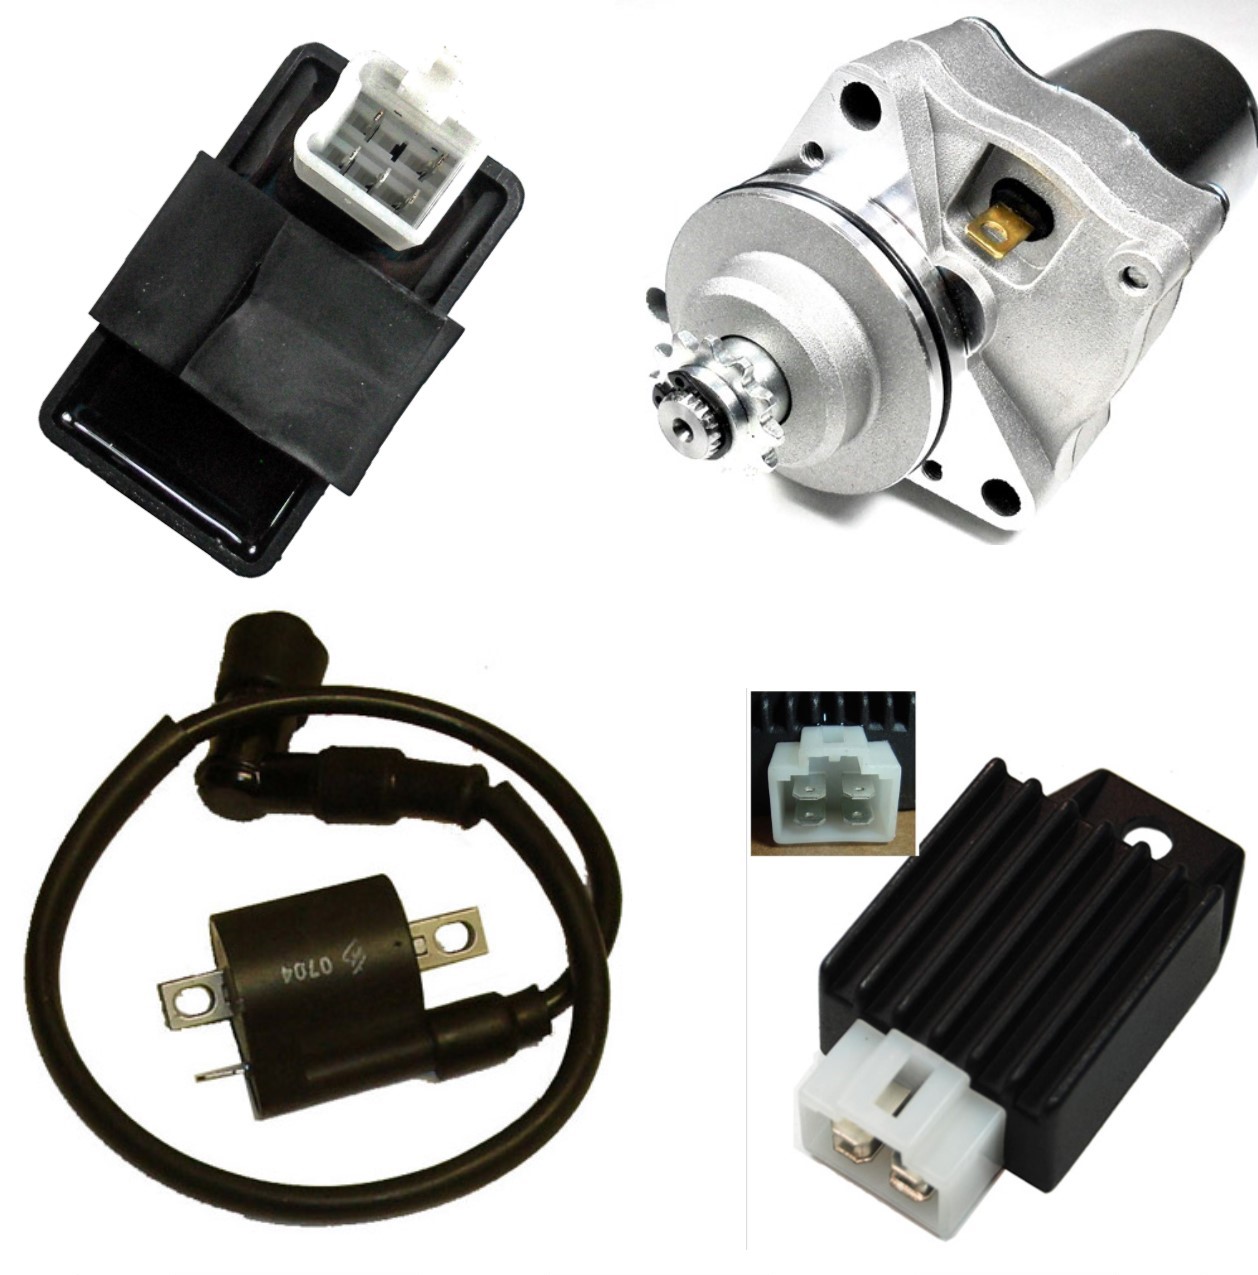 Electrical Parts Starters-CDI-Coils-Relays-Stators 125cc ATV-Dirtbikes